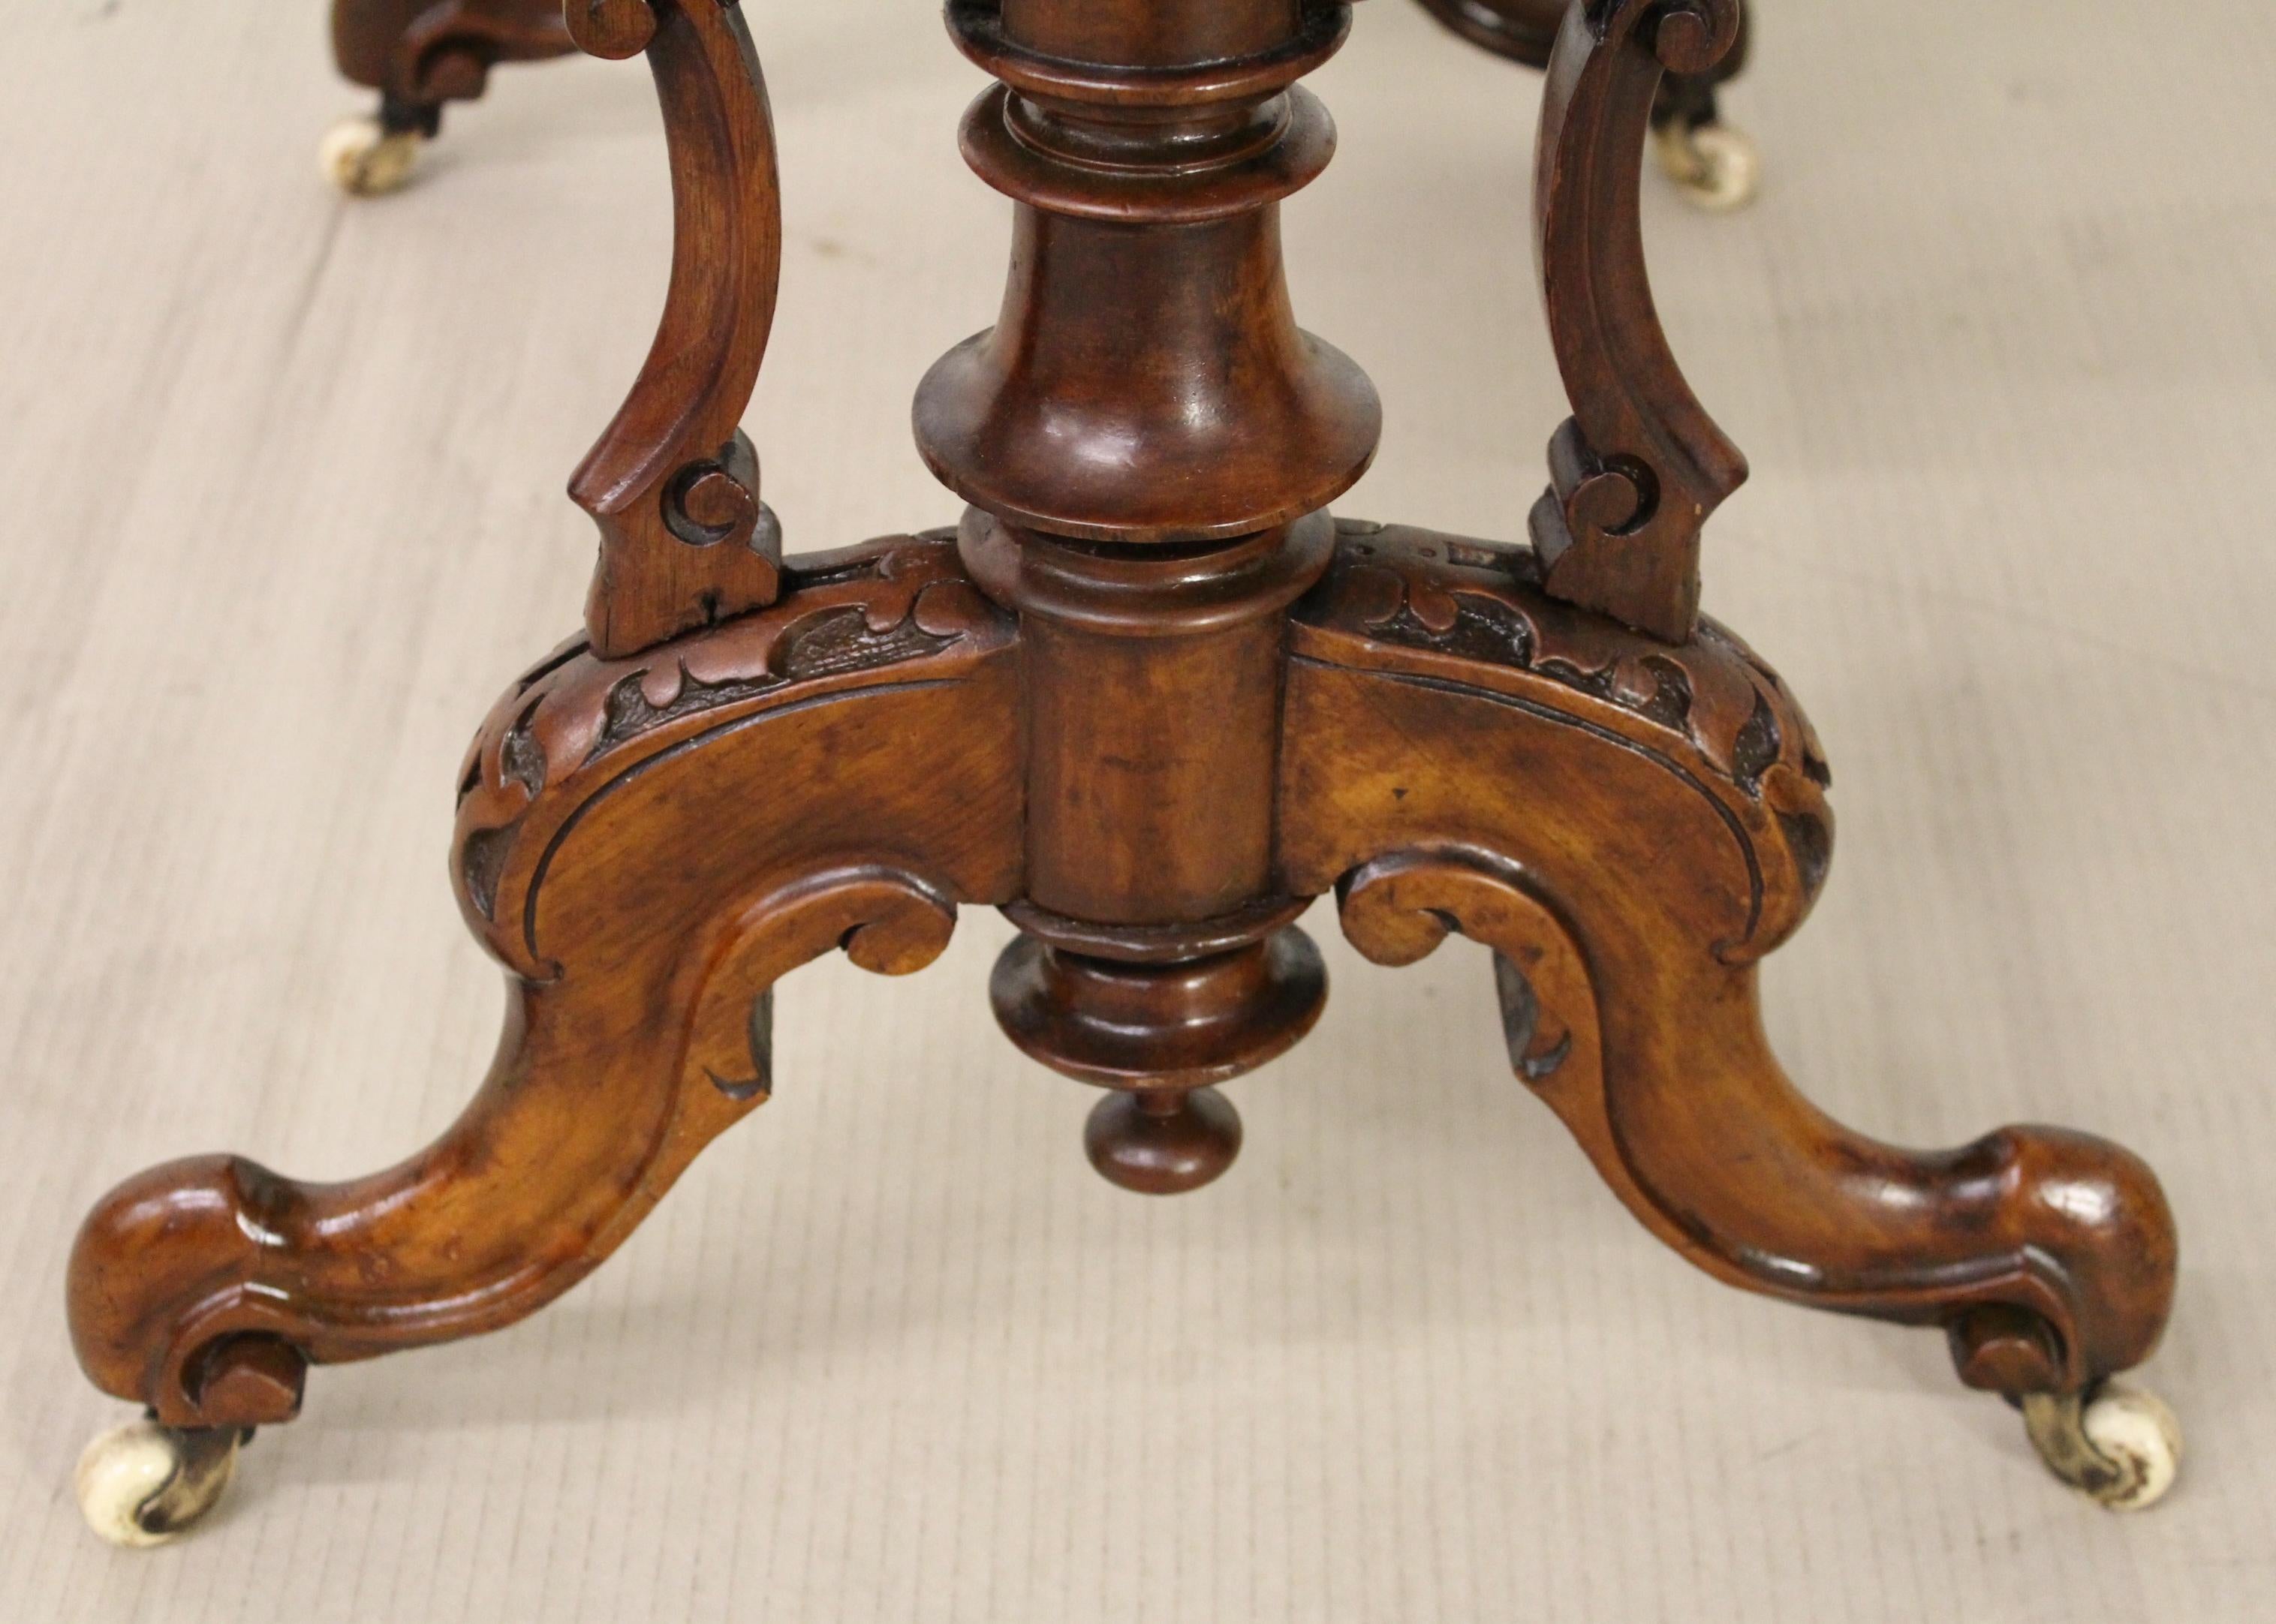 A superb quality mid-Victorian period burr walnut work/sewing/writing/table. Very well made in solid walnut with stunning burr walnut veneers. The rectangular top is decorated with Fine inlaid detailing and surrounded with a crisply carved gadrooned